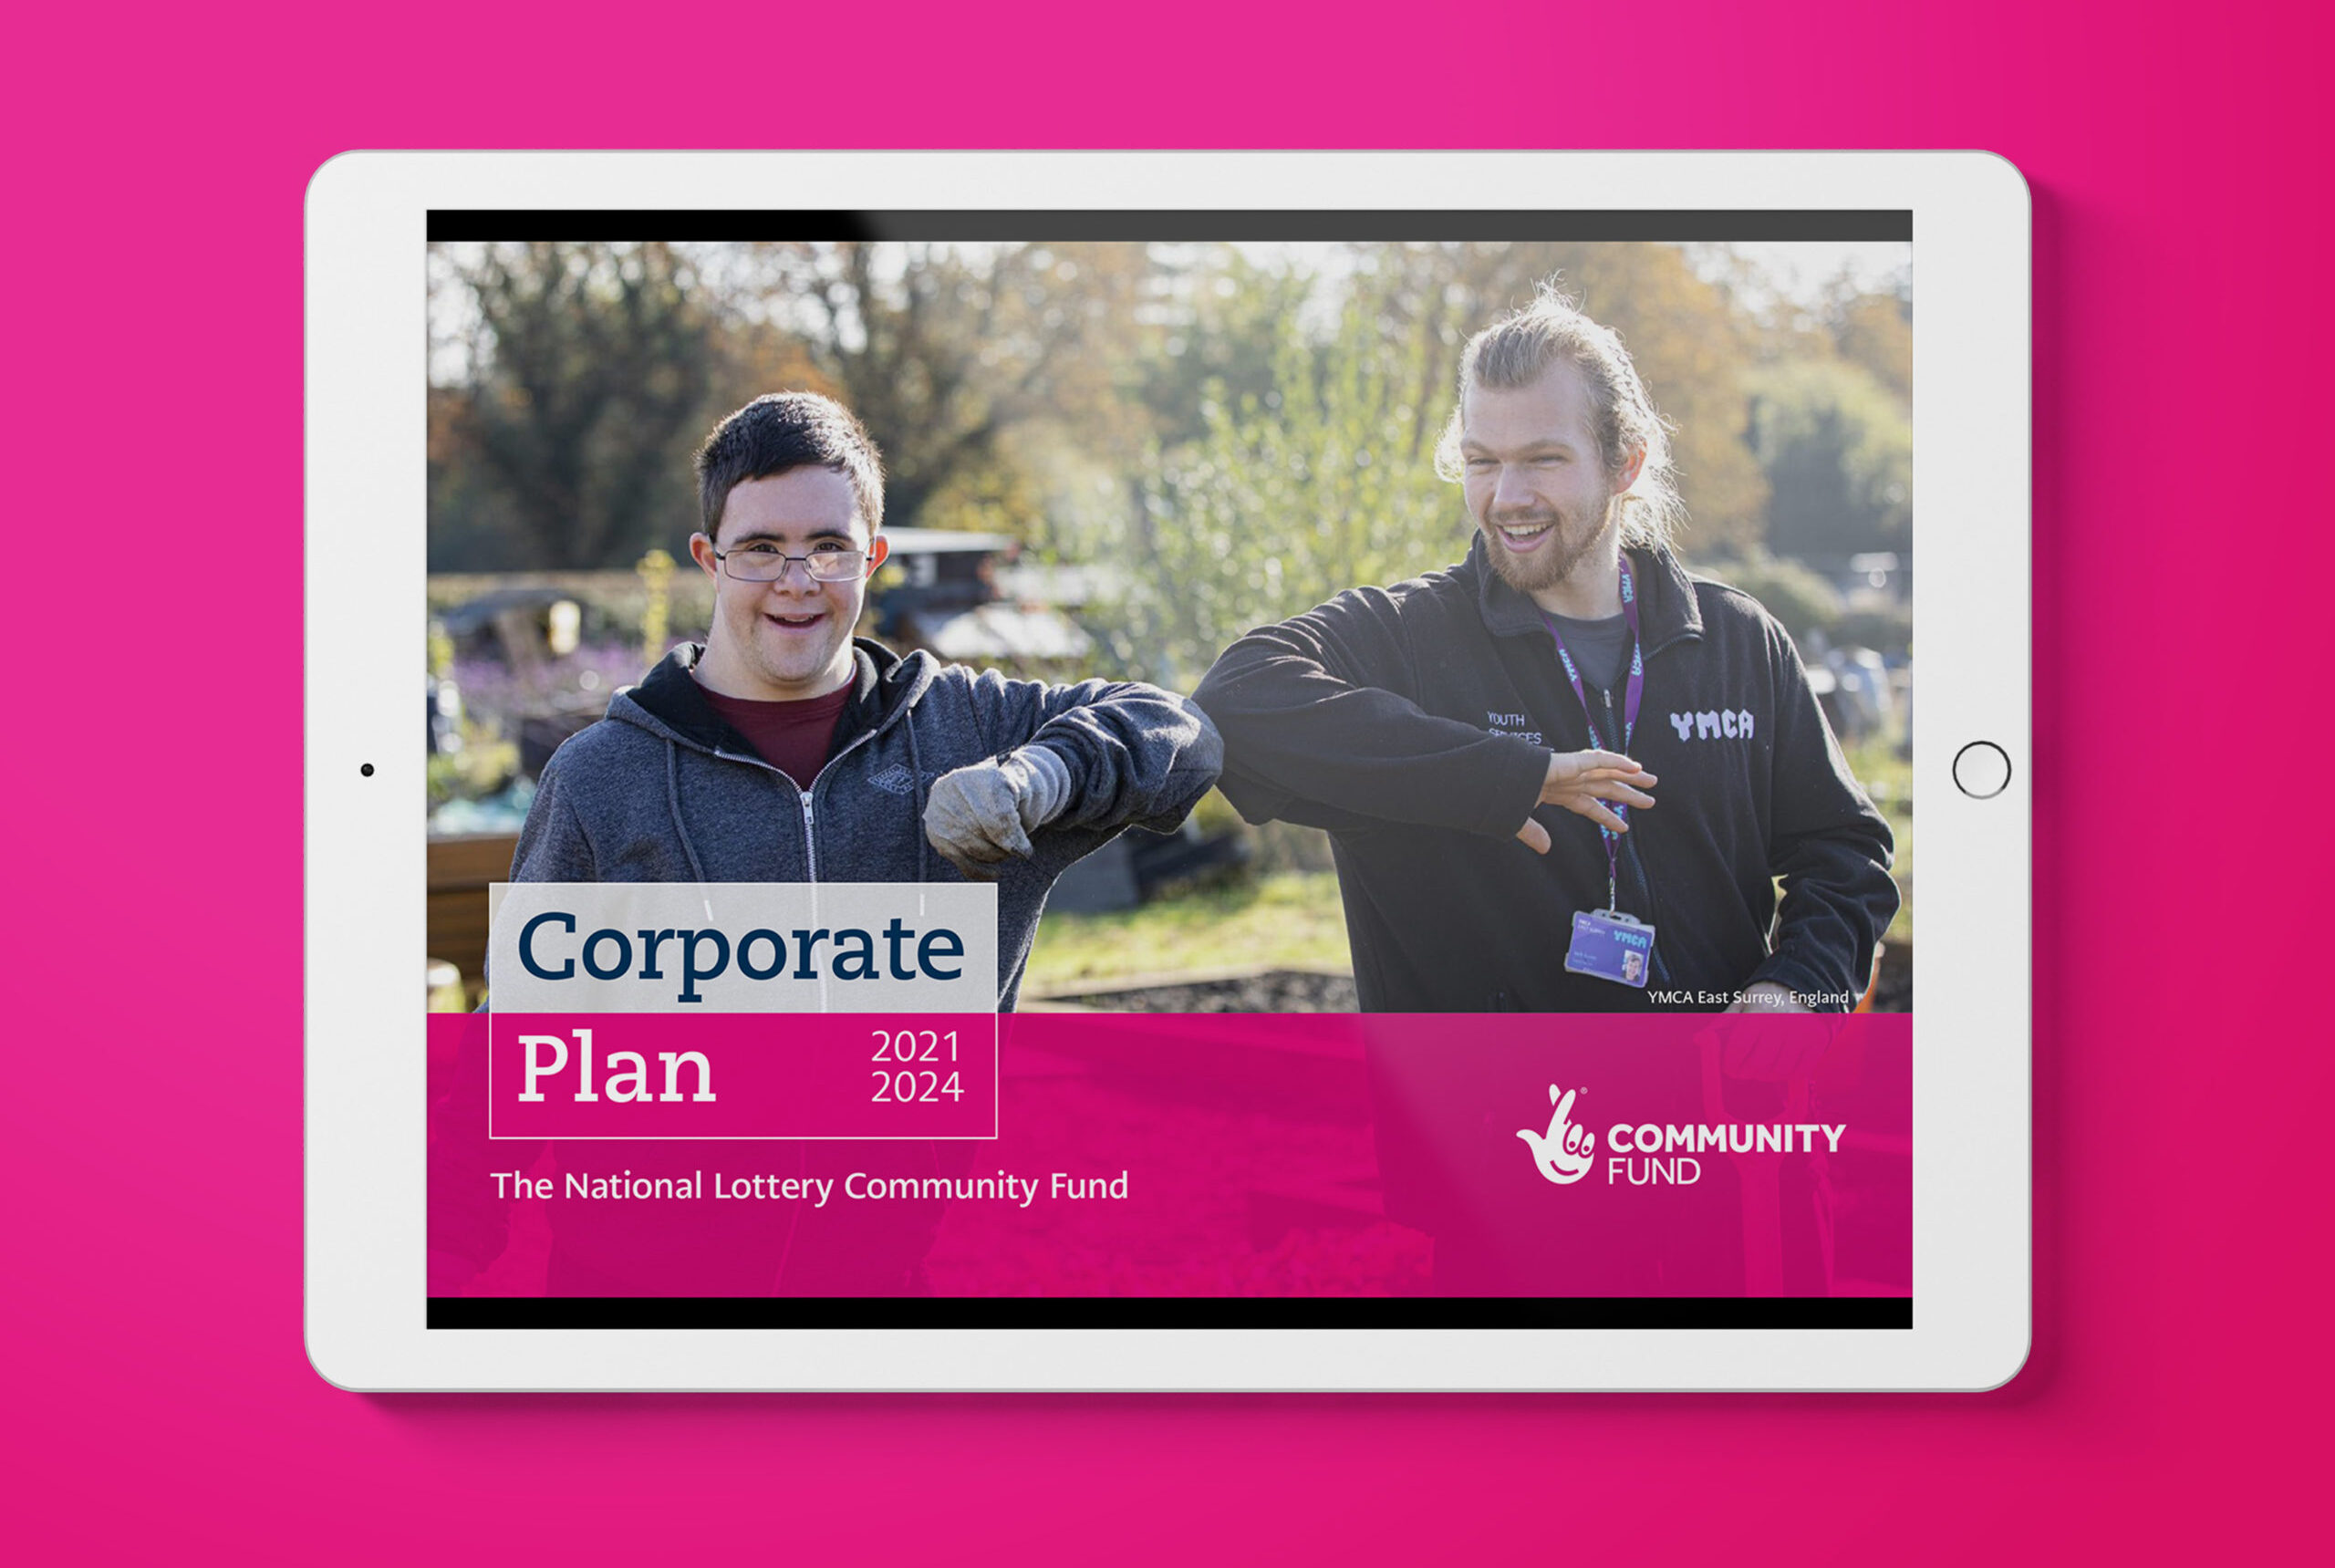 National Lottery Community Fund Corporate Plan displayed on an iPad